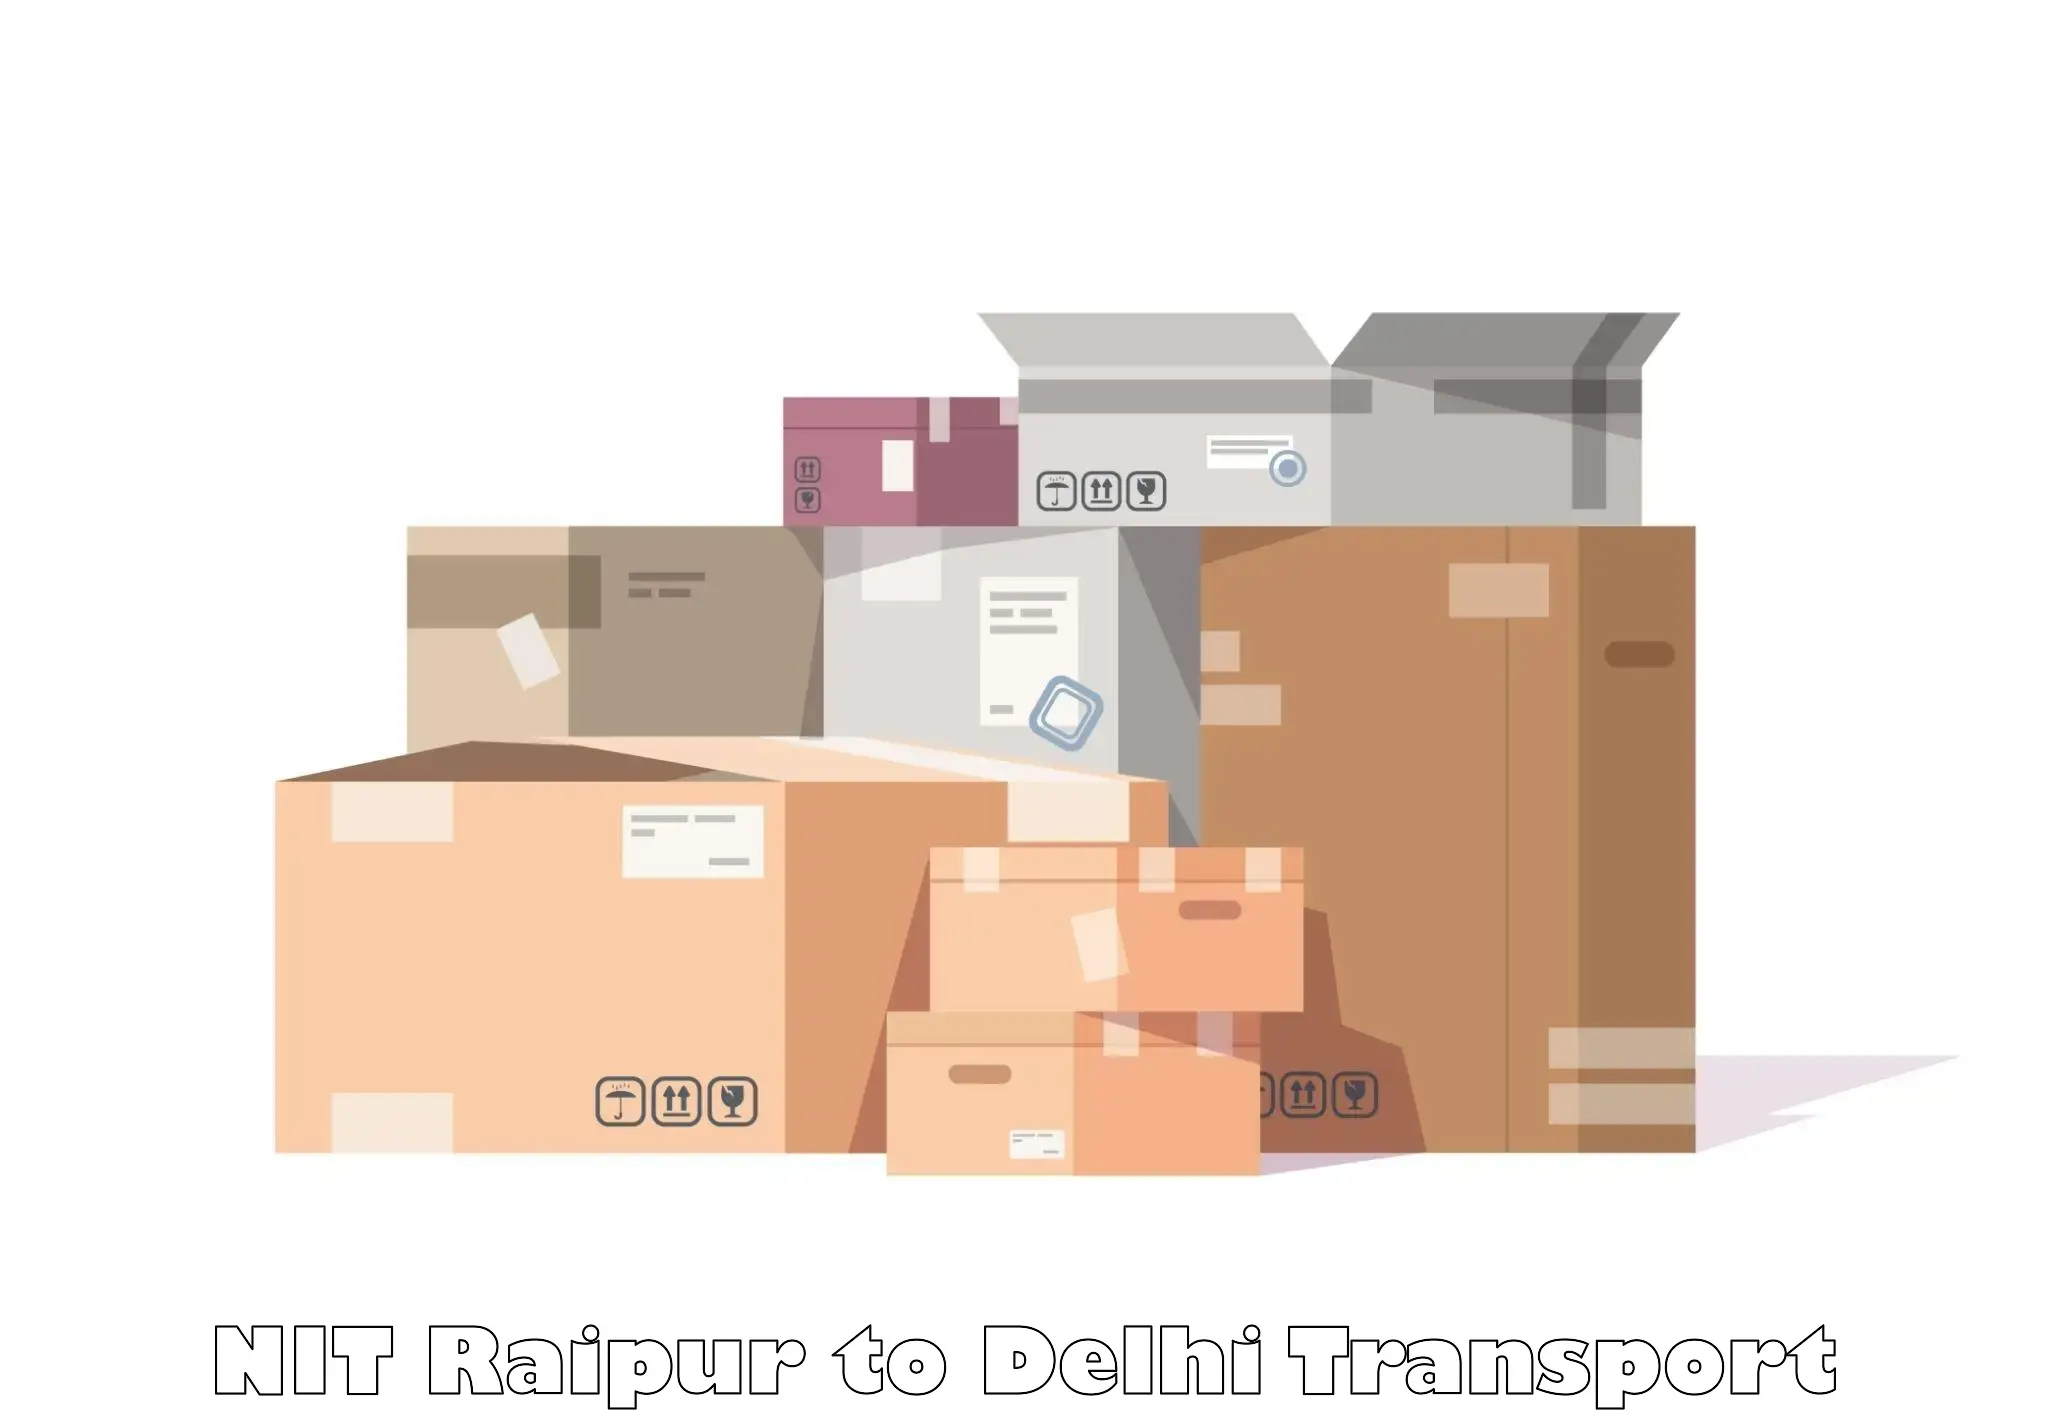 Delivery service NIT Raipur to East Delhi